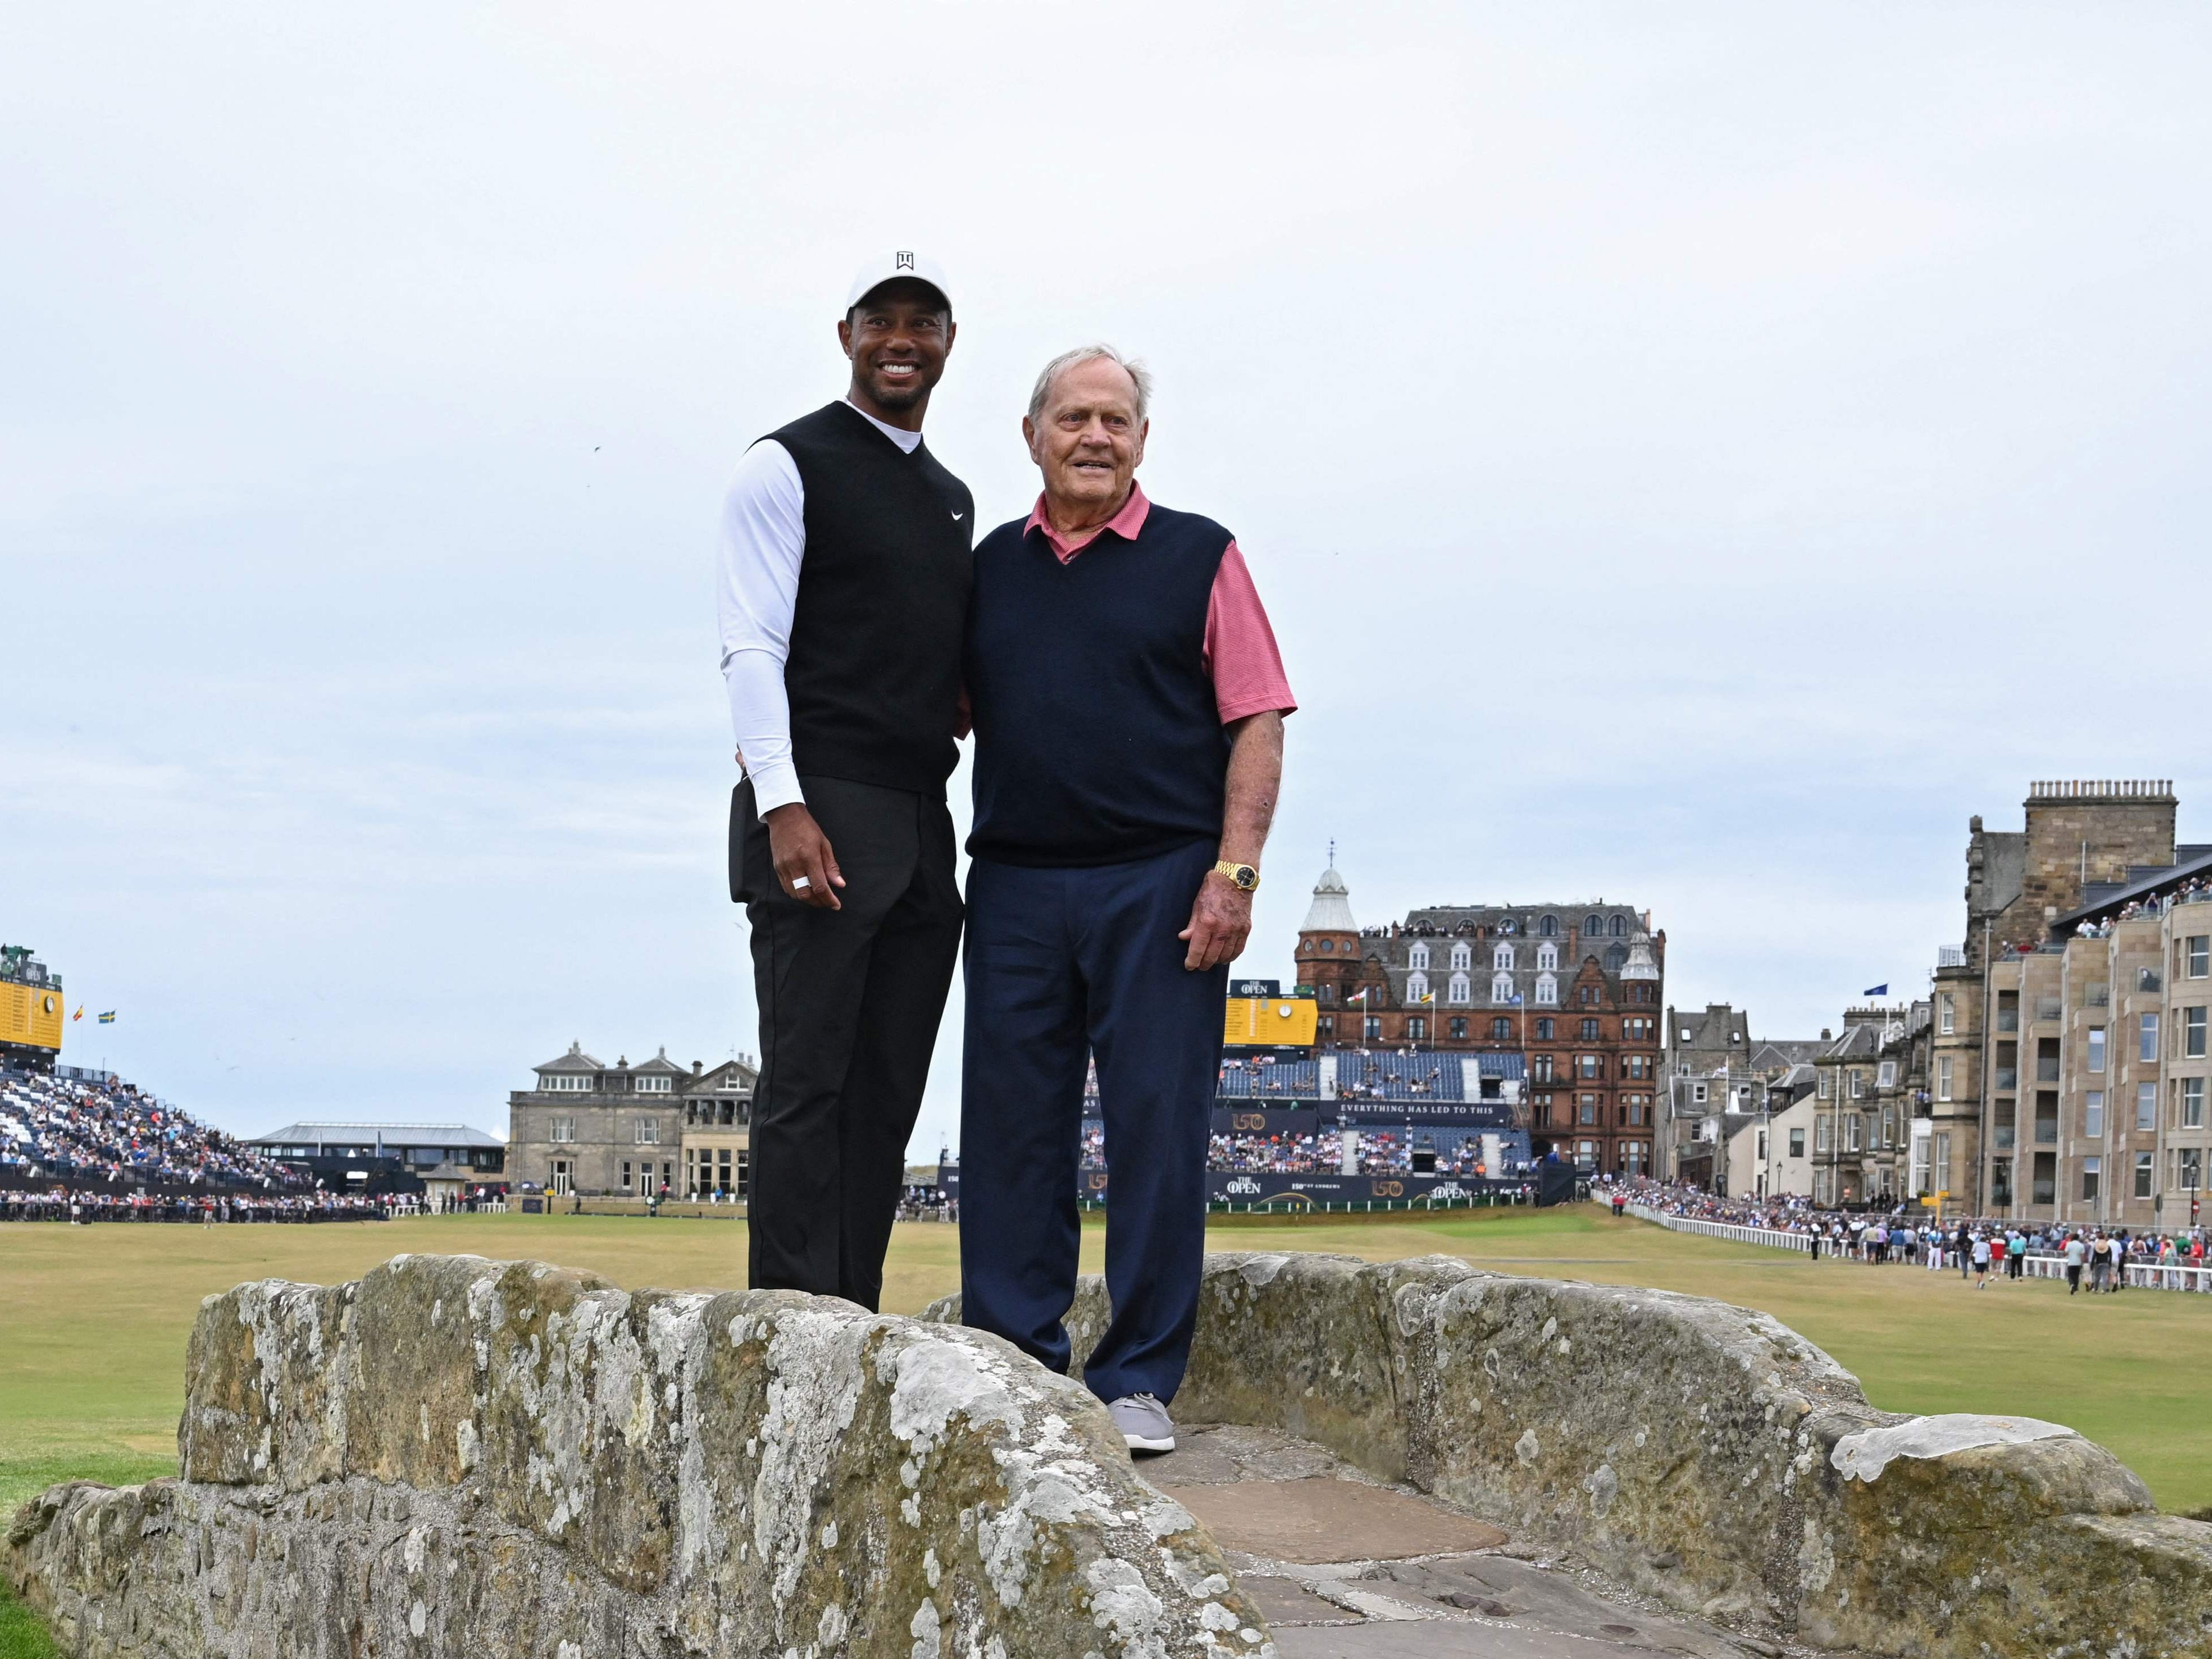 The Open 2022: St Andrews' charm has Tiger Woods and golf primed for  special major | The Independent